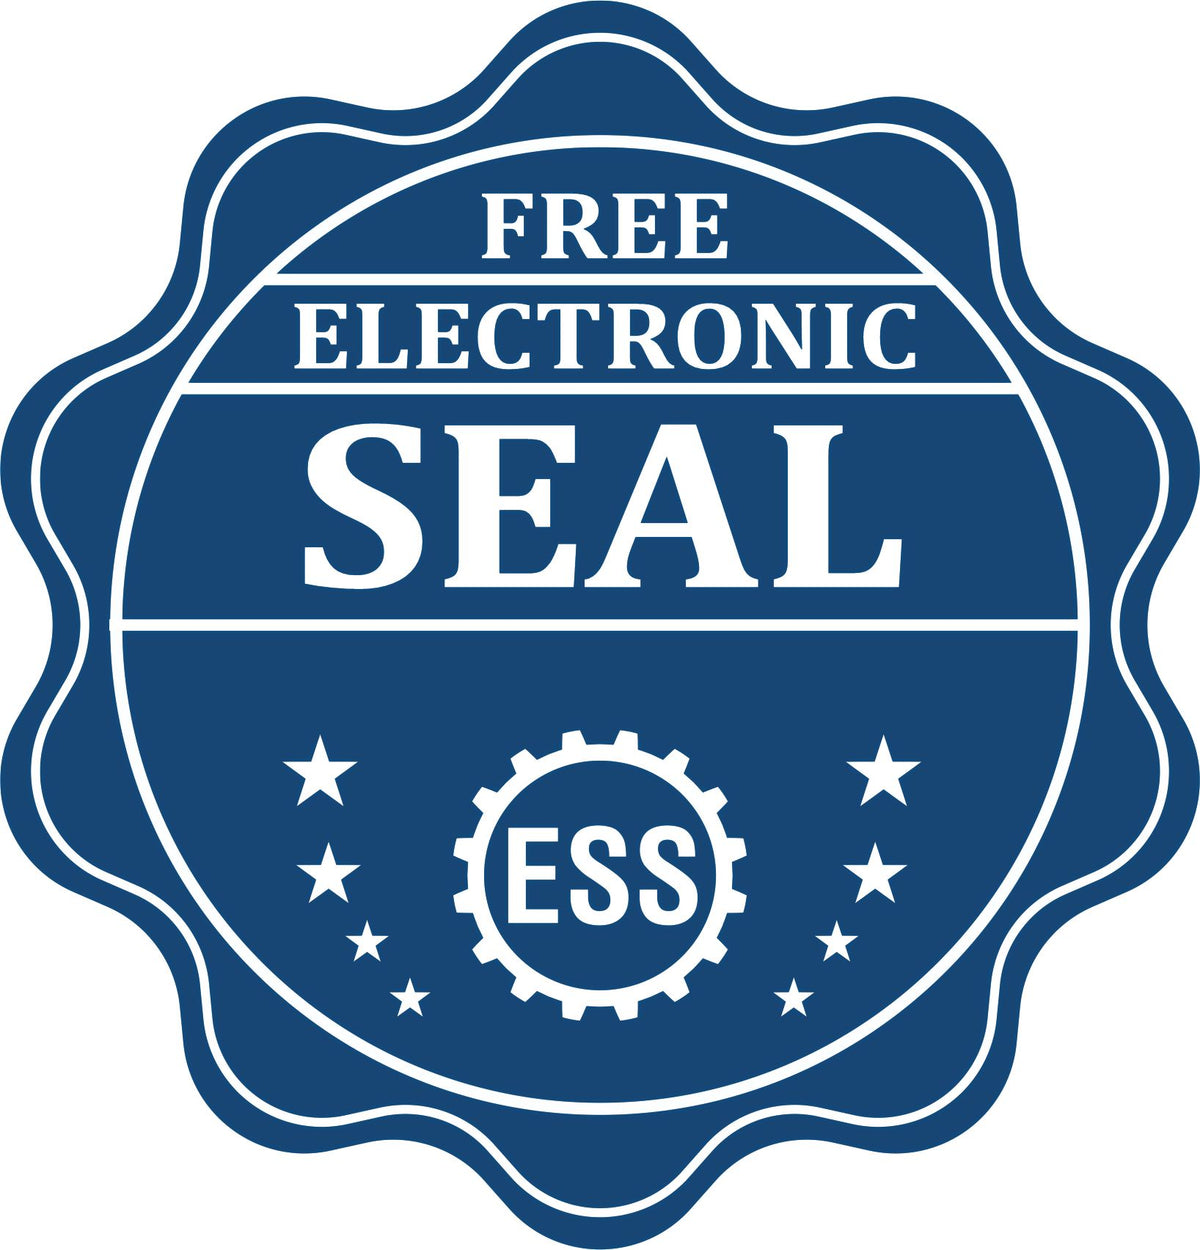 A badge showing a free electronic seal for the Slim Pre-Inked New Jersey Architect Seal Stamp with stars and the ESS gear on the emblem.